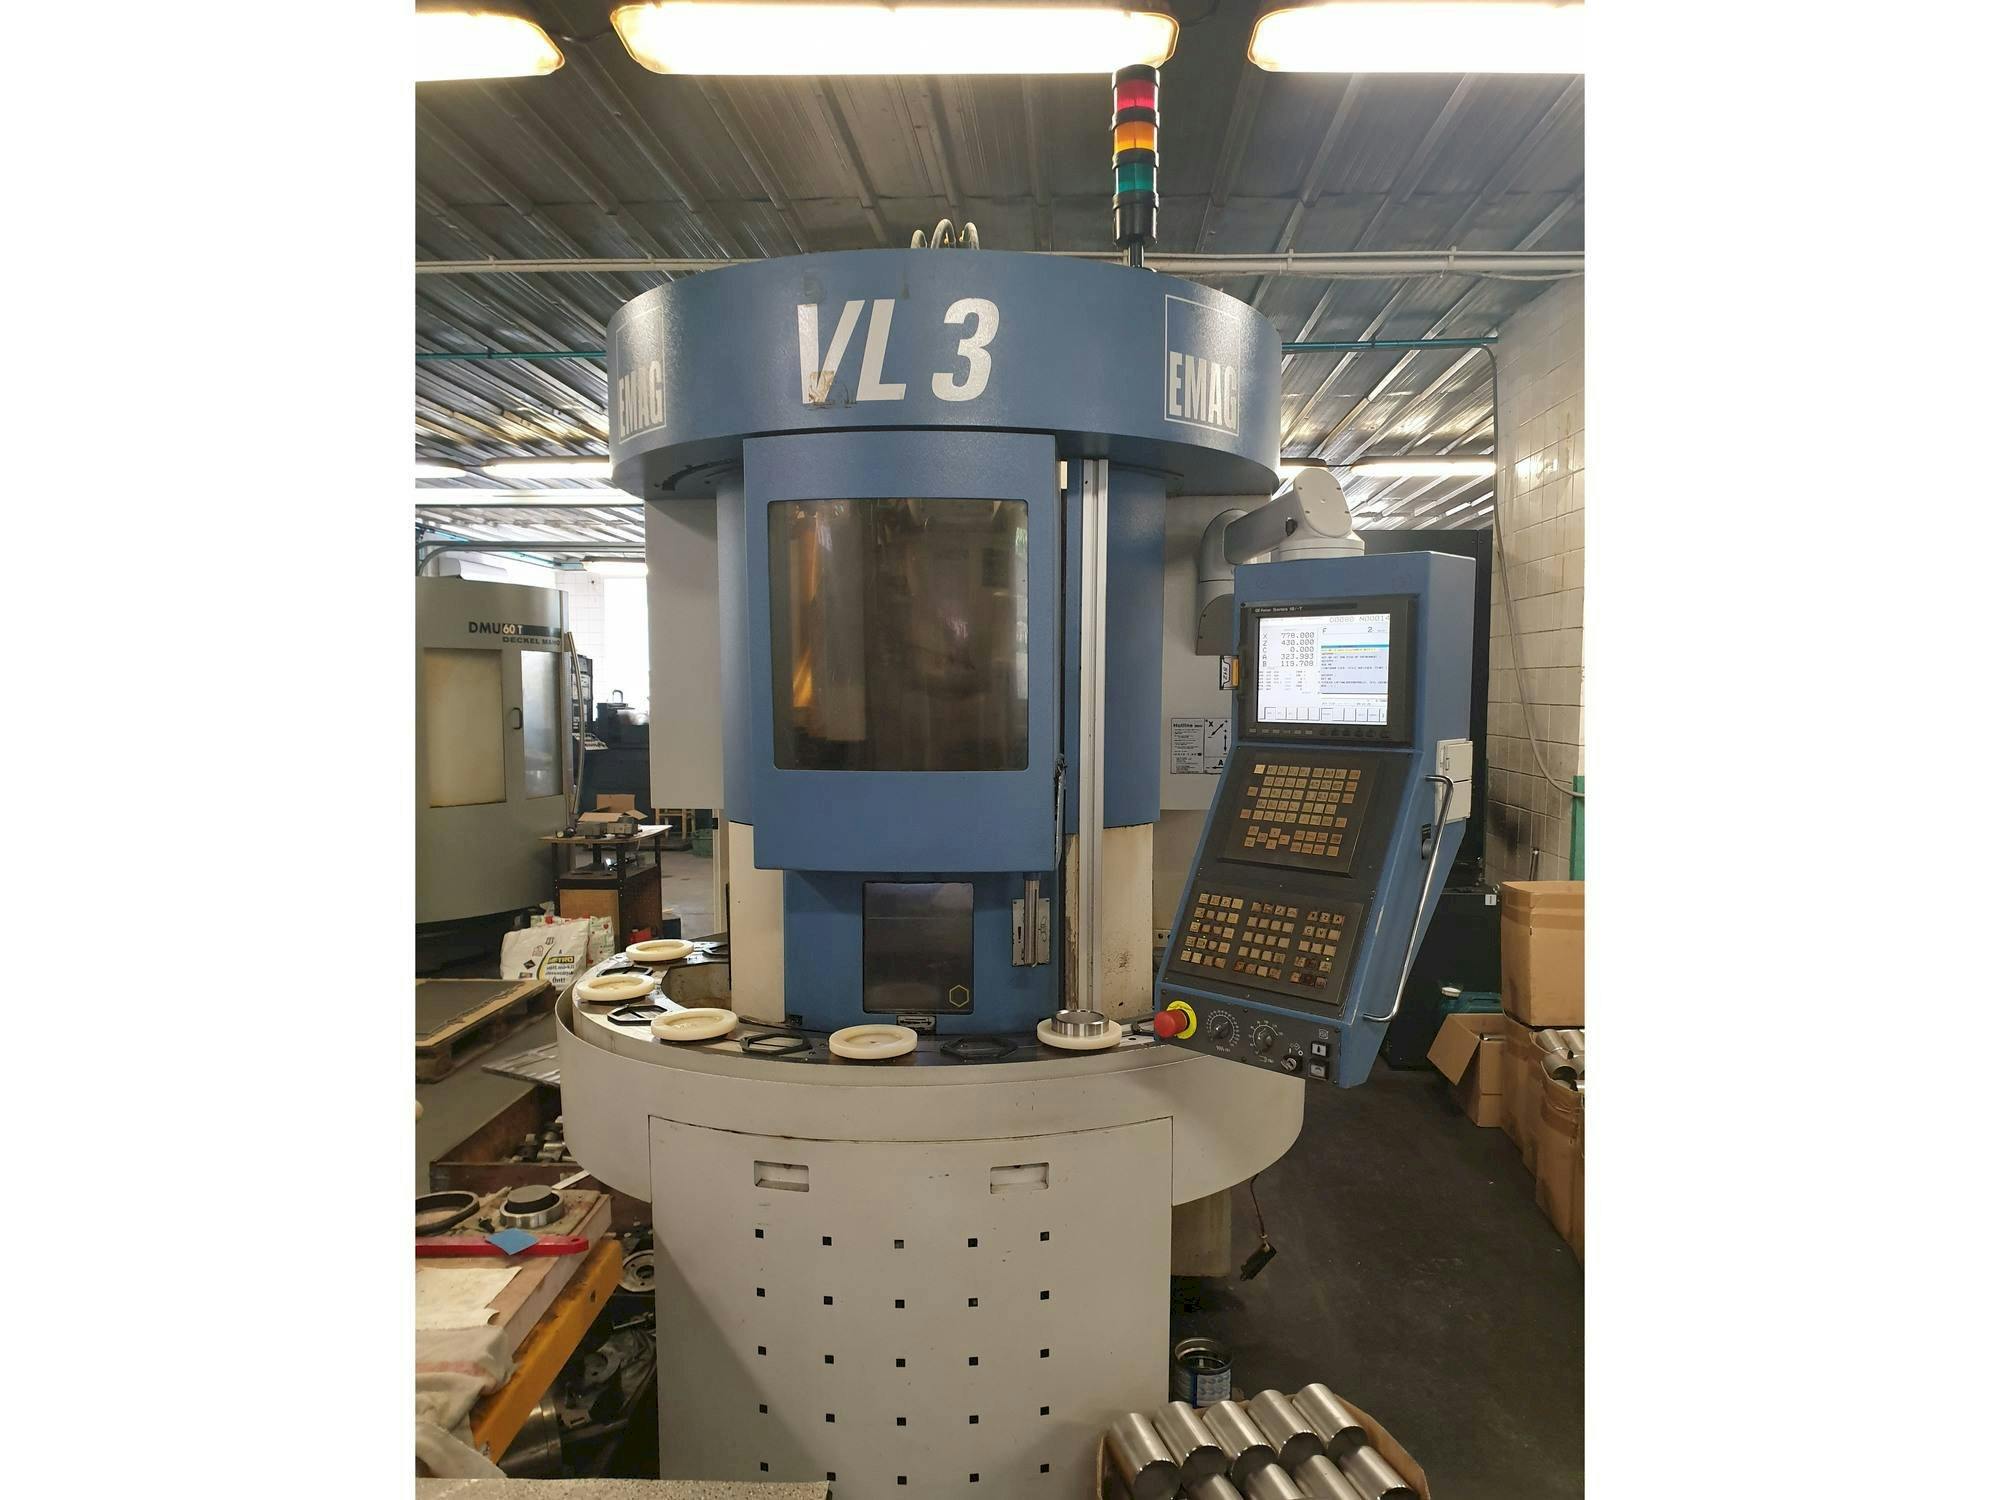 Front view of EMAG VL 3  machine